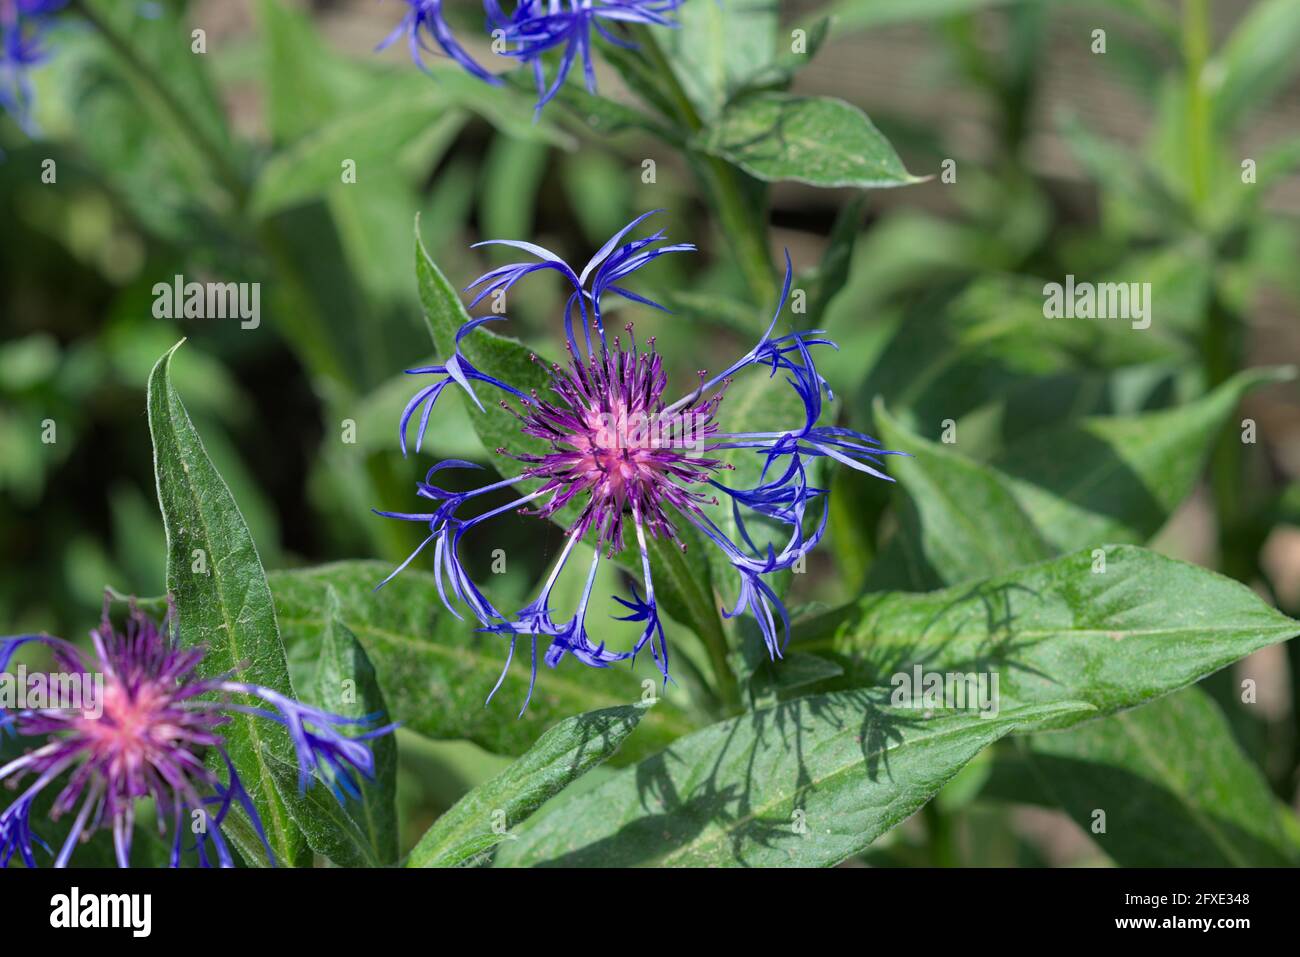 Beautiful and delicate blue and purple bloom of a cornflower (Cyanus montanus) in a Glebe garden in Ottawa, Ontario, Canada. Stock Photo